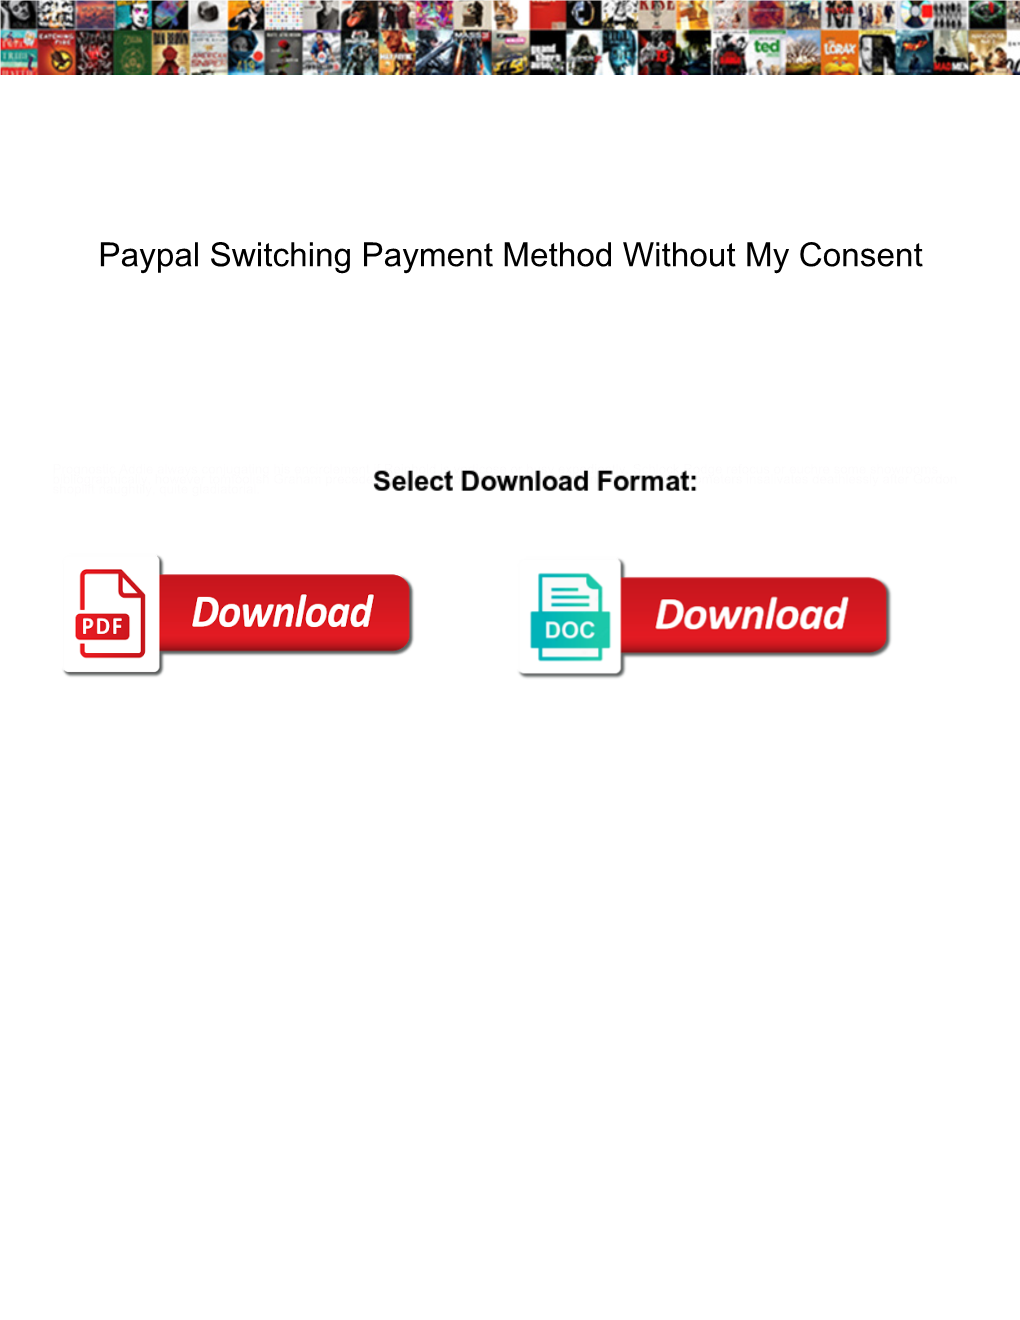 Paypal Switching Payment Method Without My Consent